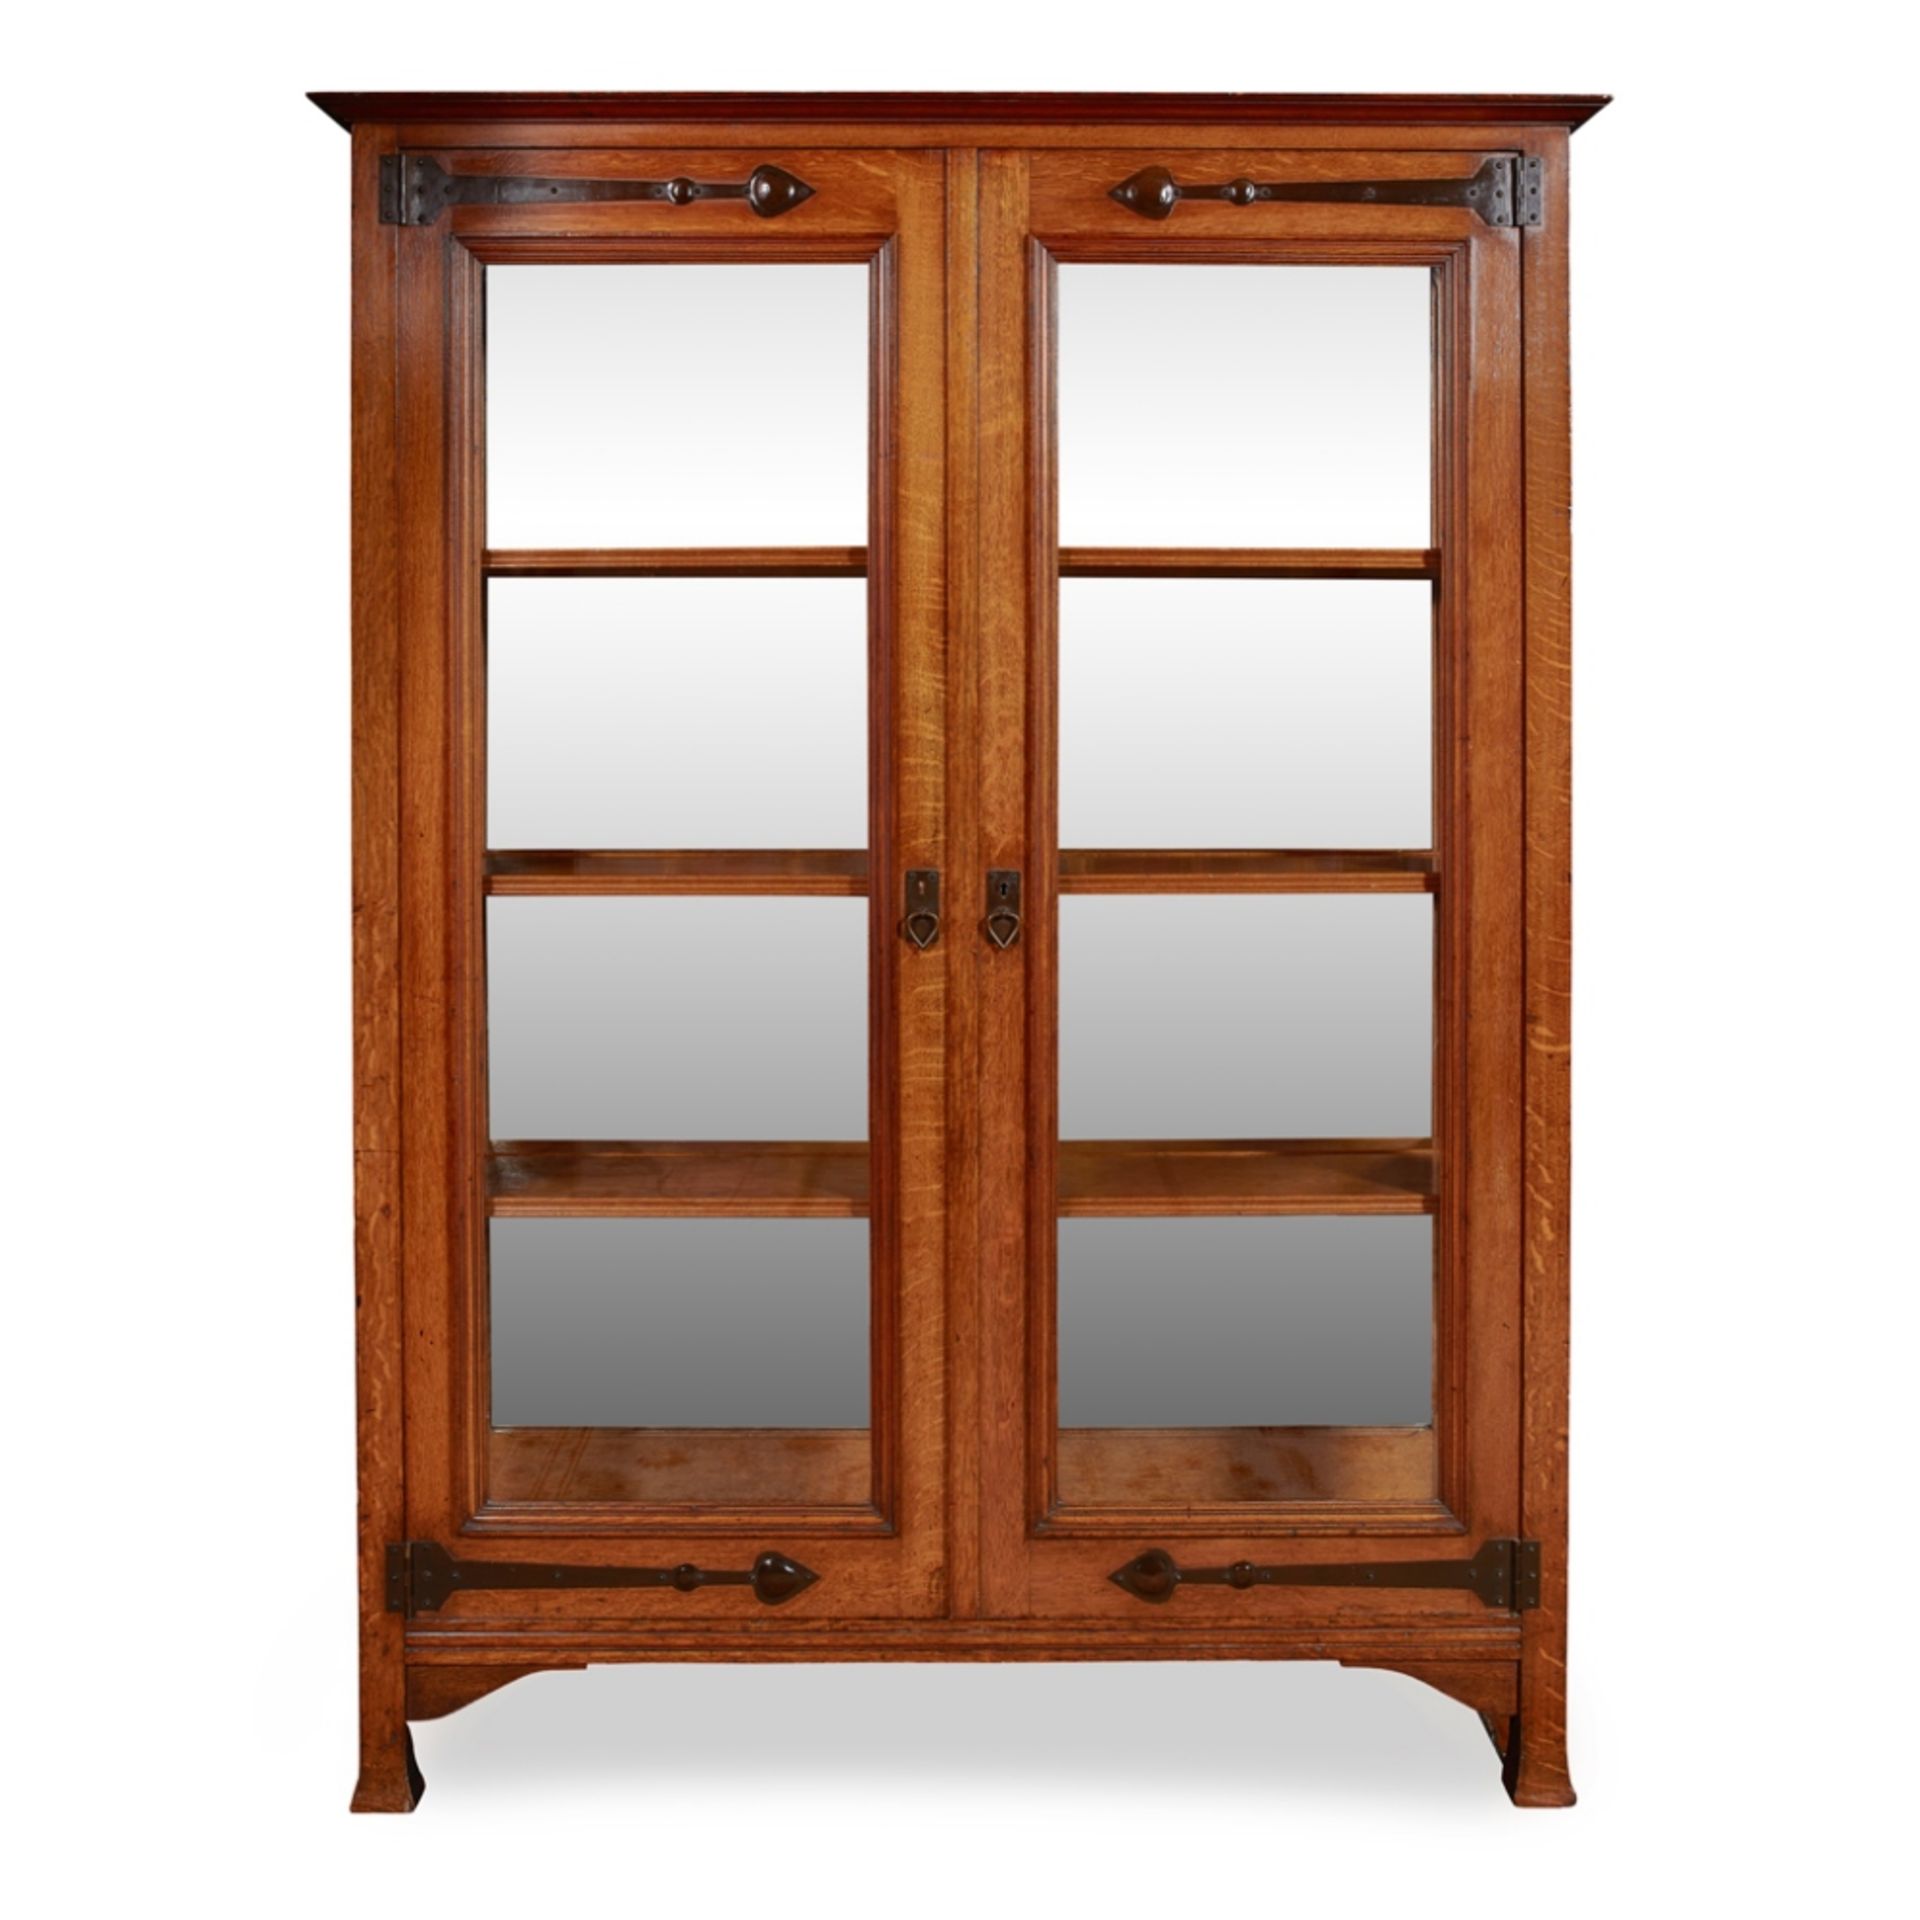 ENGLISH SCHOOL ARTS & CRAFTS OAK DISPLAY CABINET, CIRCA 1900 the moulded and projecting cornice